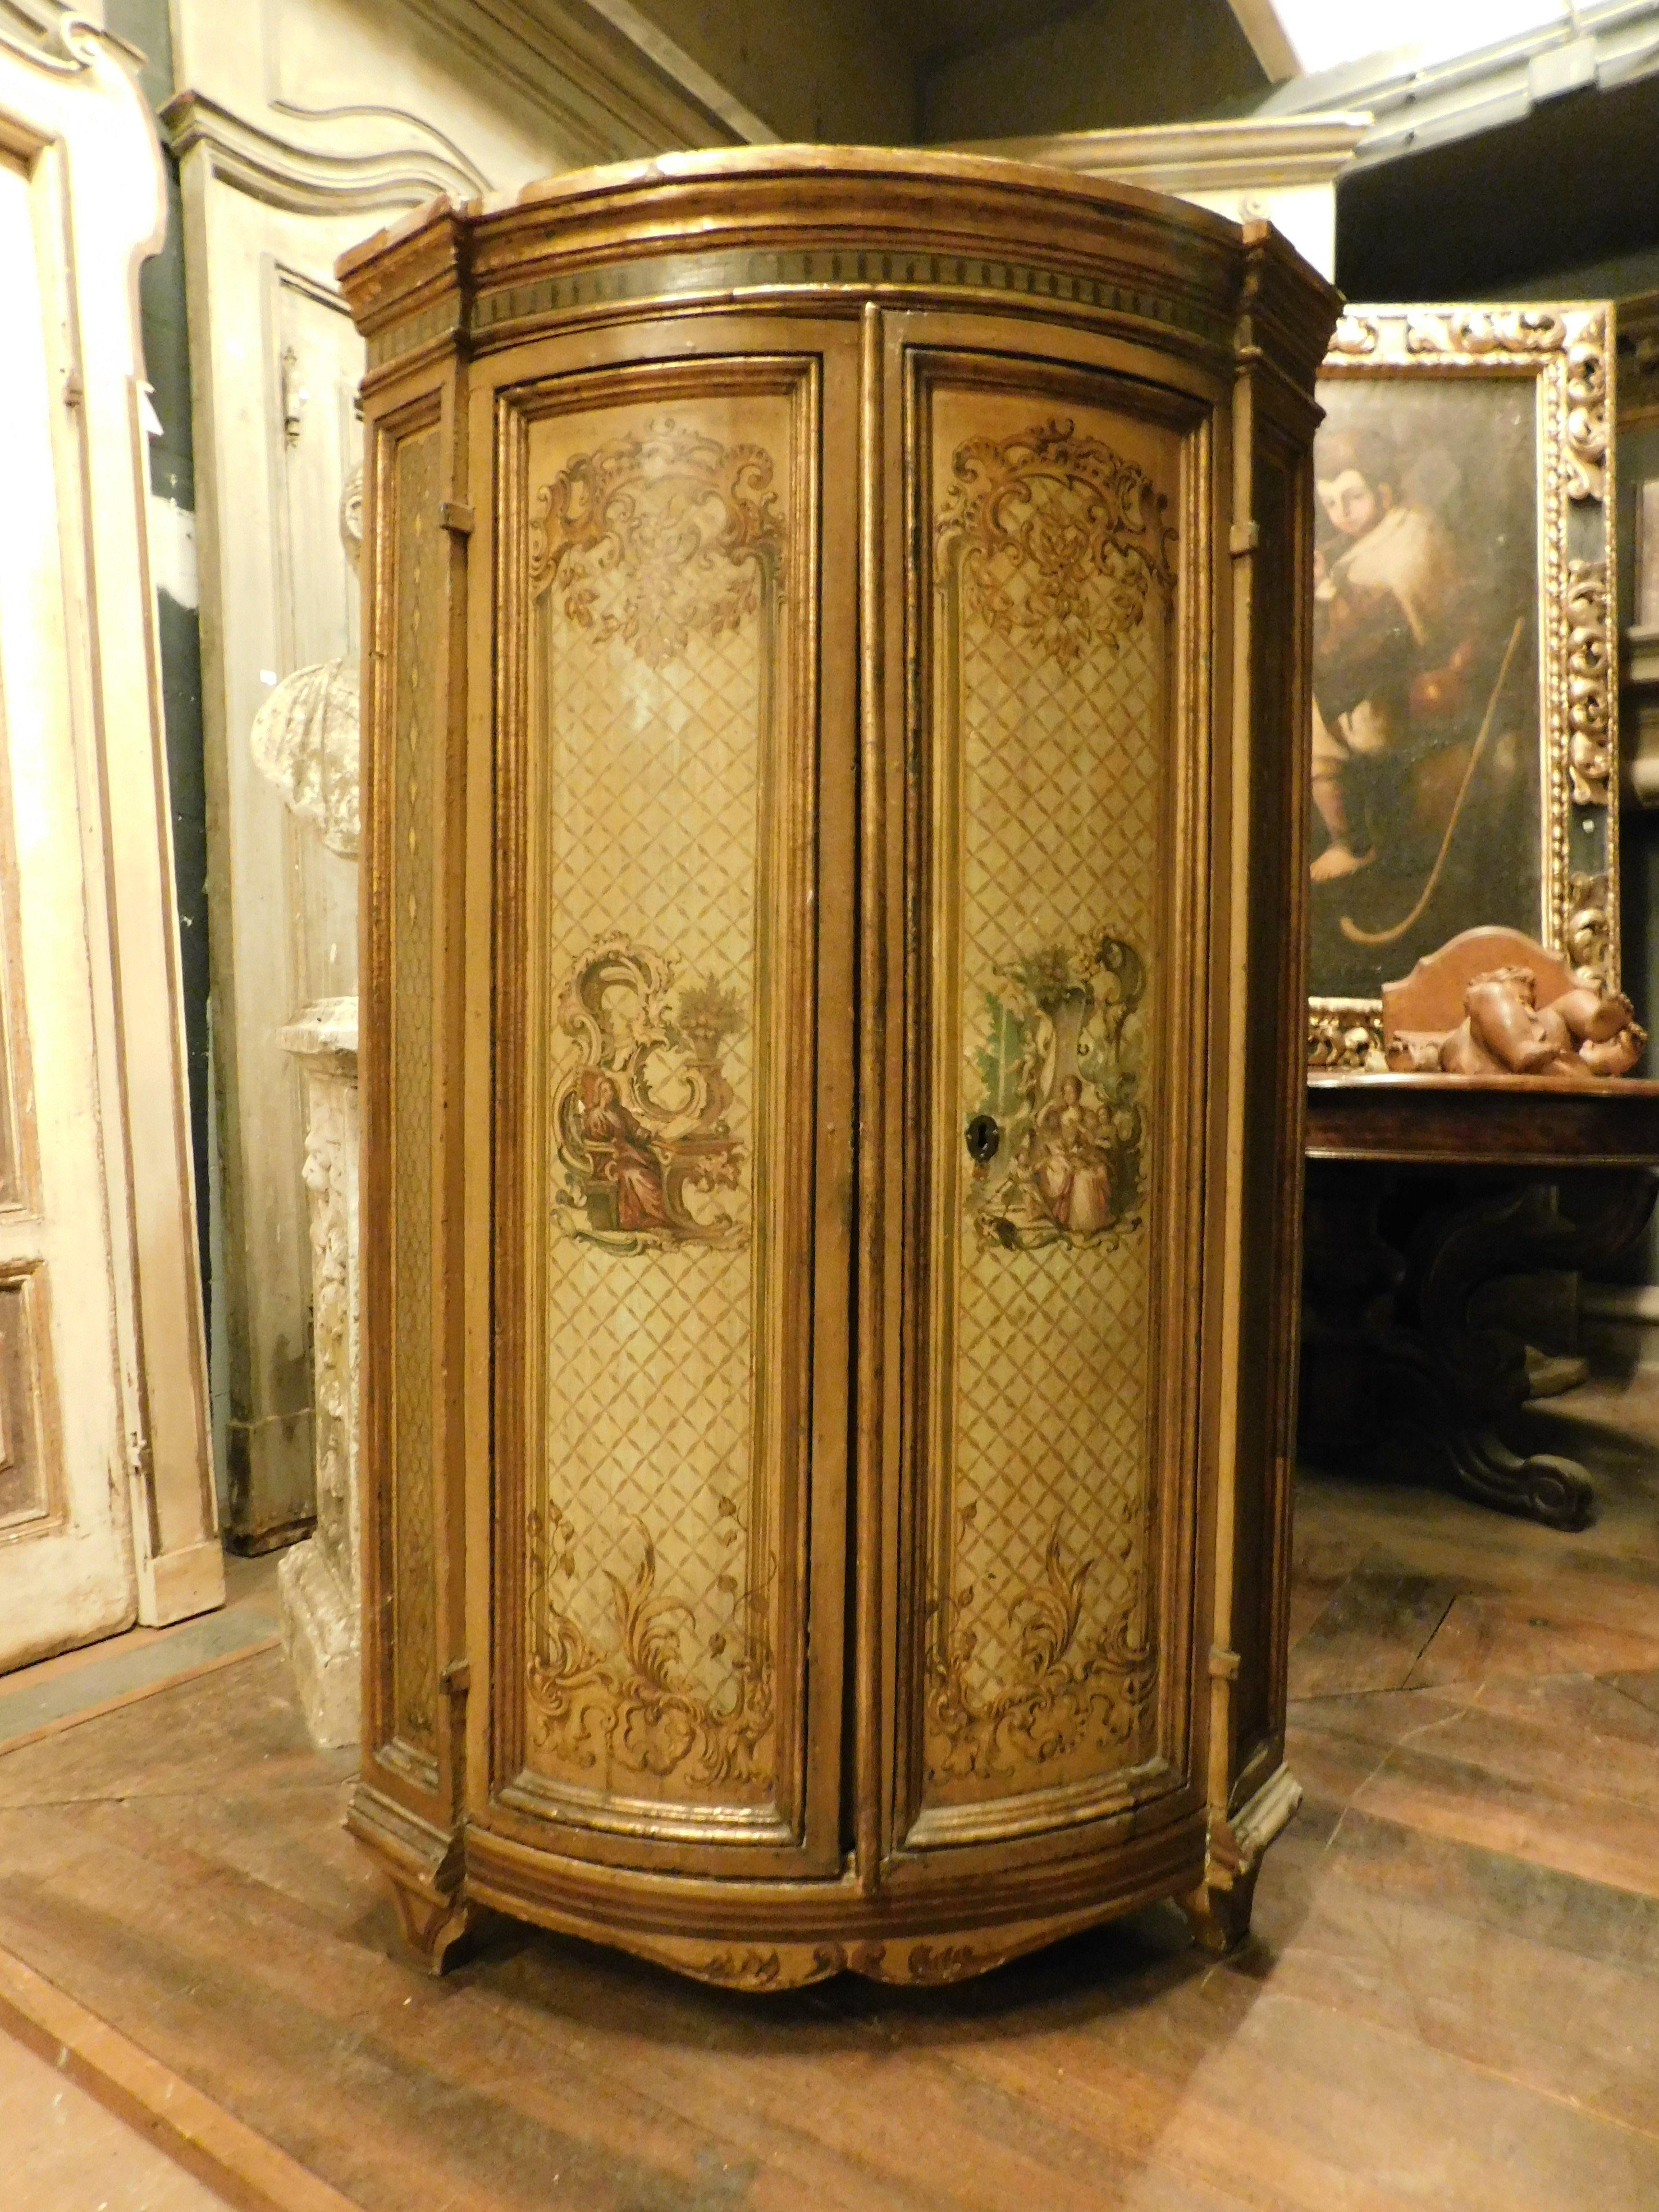 Ancient antique corner cabinet, lacquered cabinet on a yellow background and hand painted with baroque scrolls and romantic medallions, made in Italy (from Rome), from the 18th century, with original ironwork and shelves inside, maximum measurement